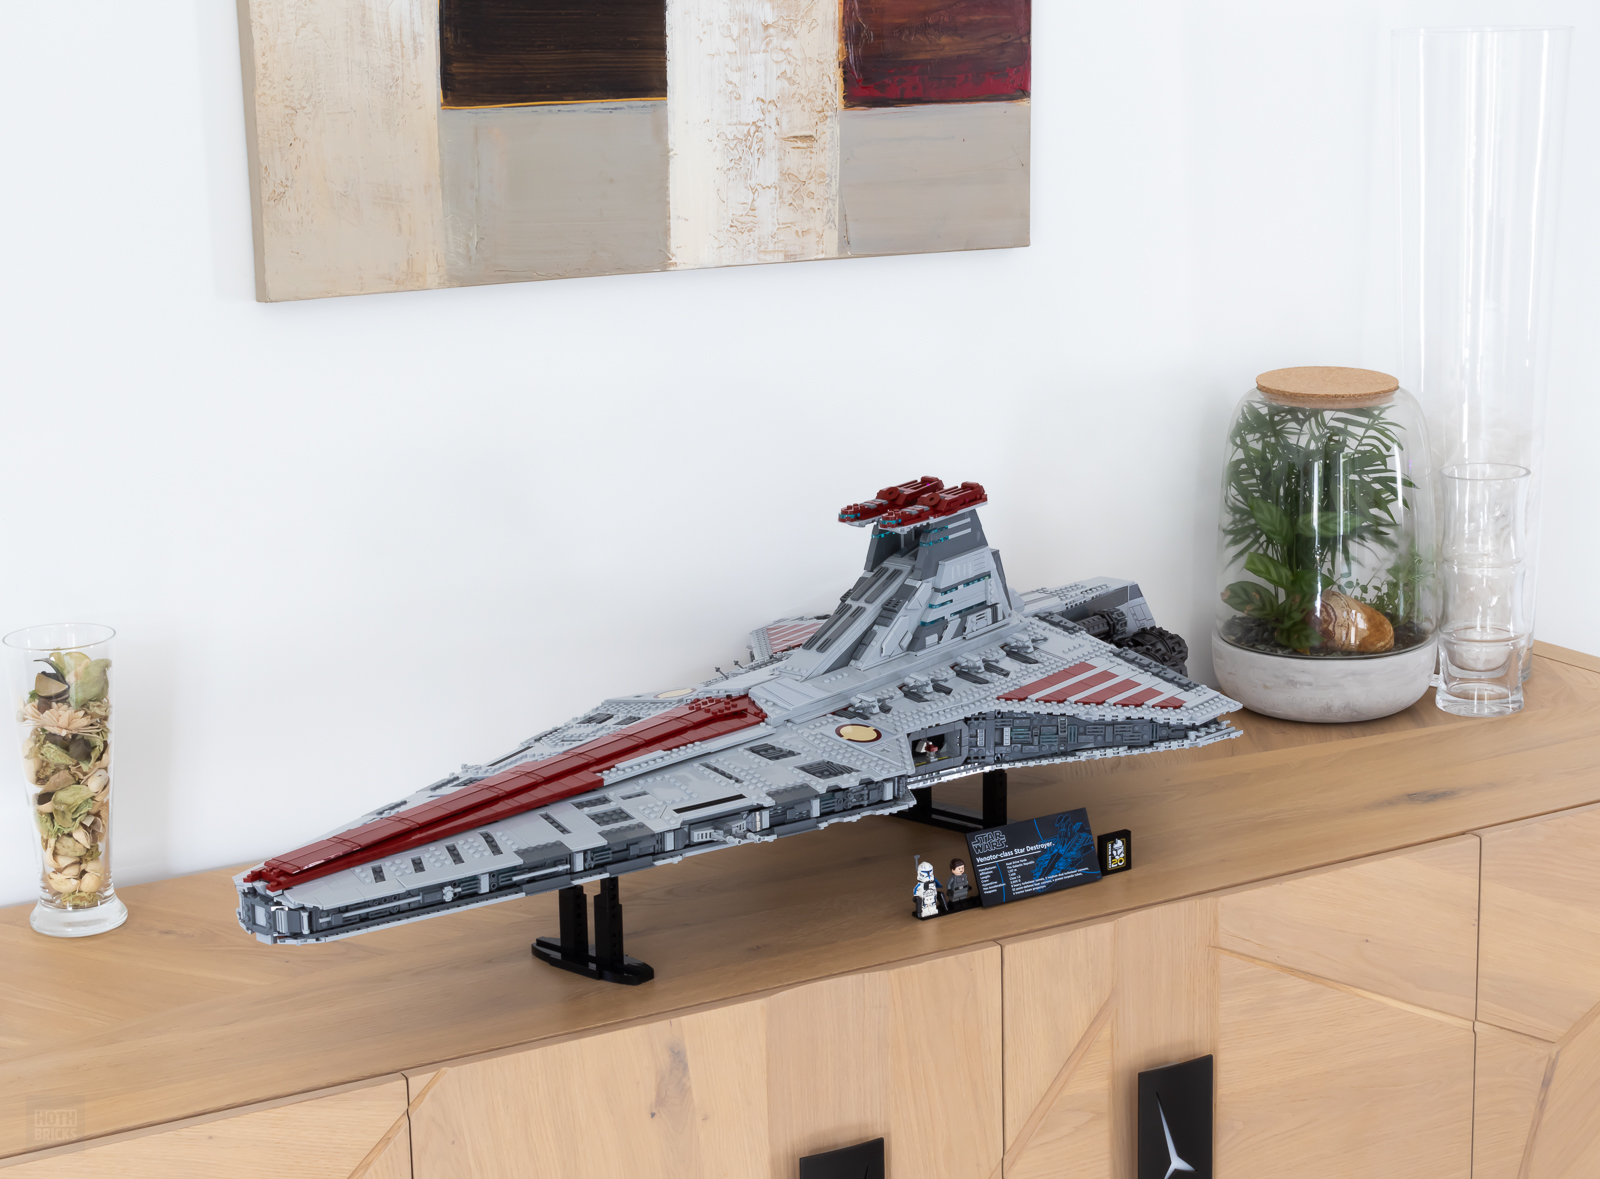 These Lego mini ships of all scales make a perfect display